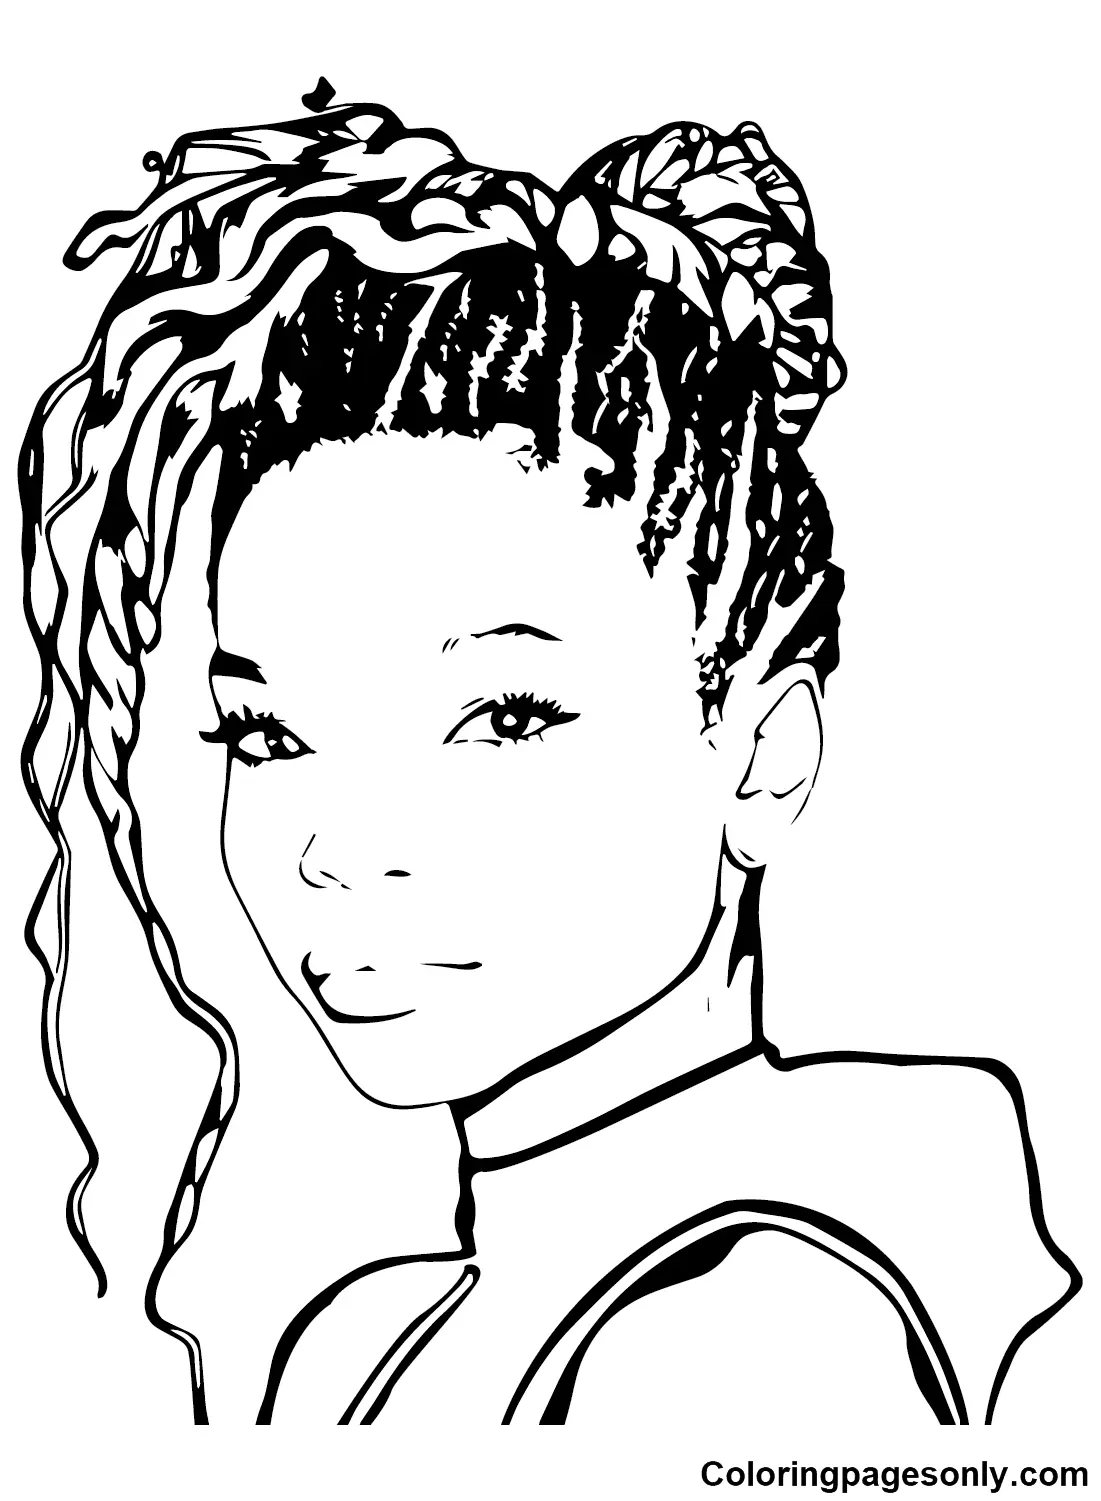 Halle Bailey Coloring Pages